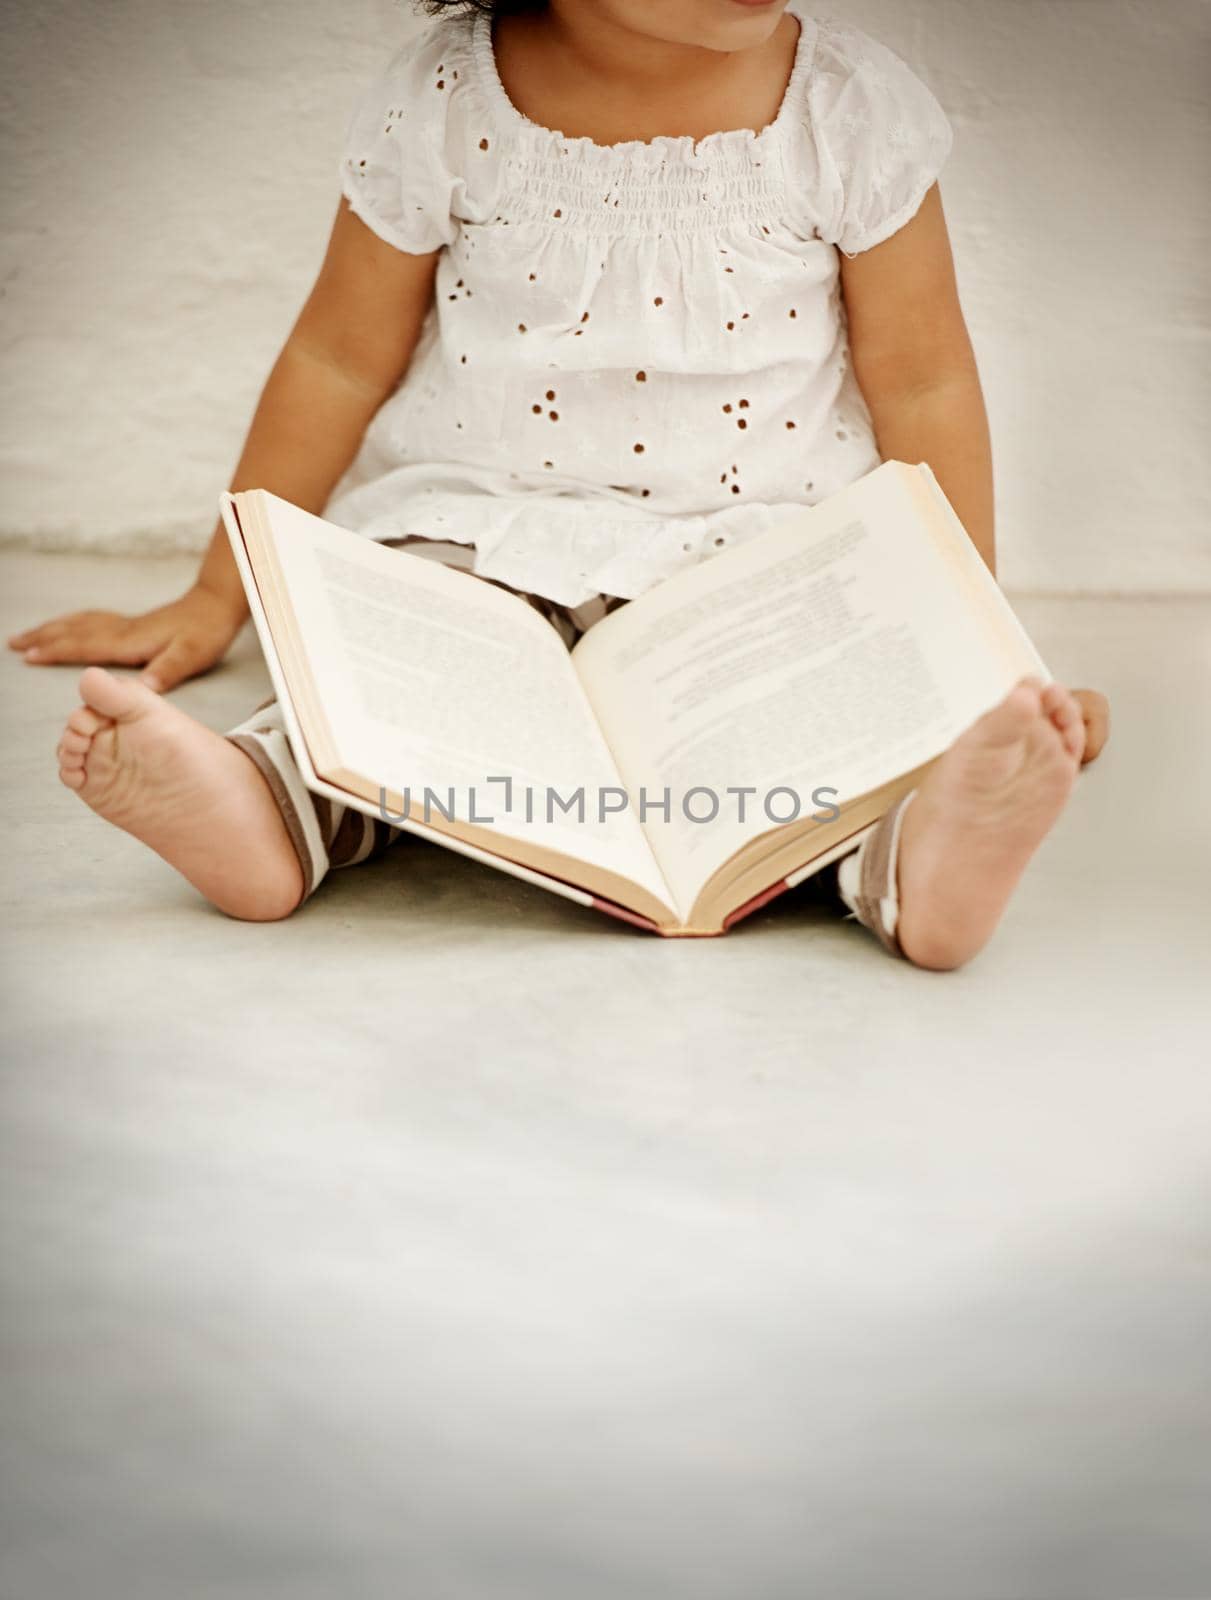 Catching up on my reading. A little girl reading a book. by YuriArcurs